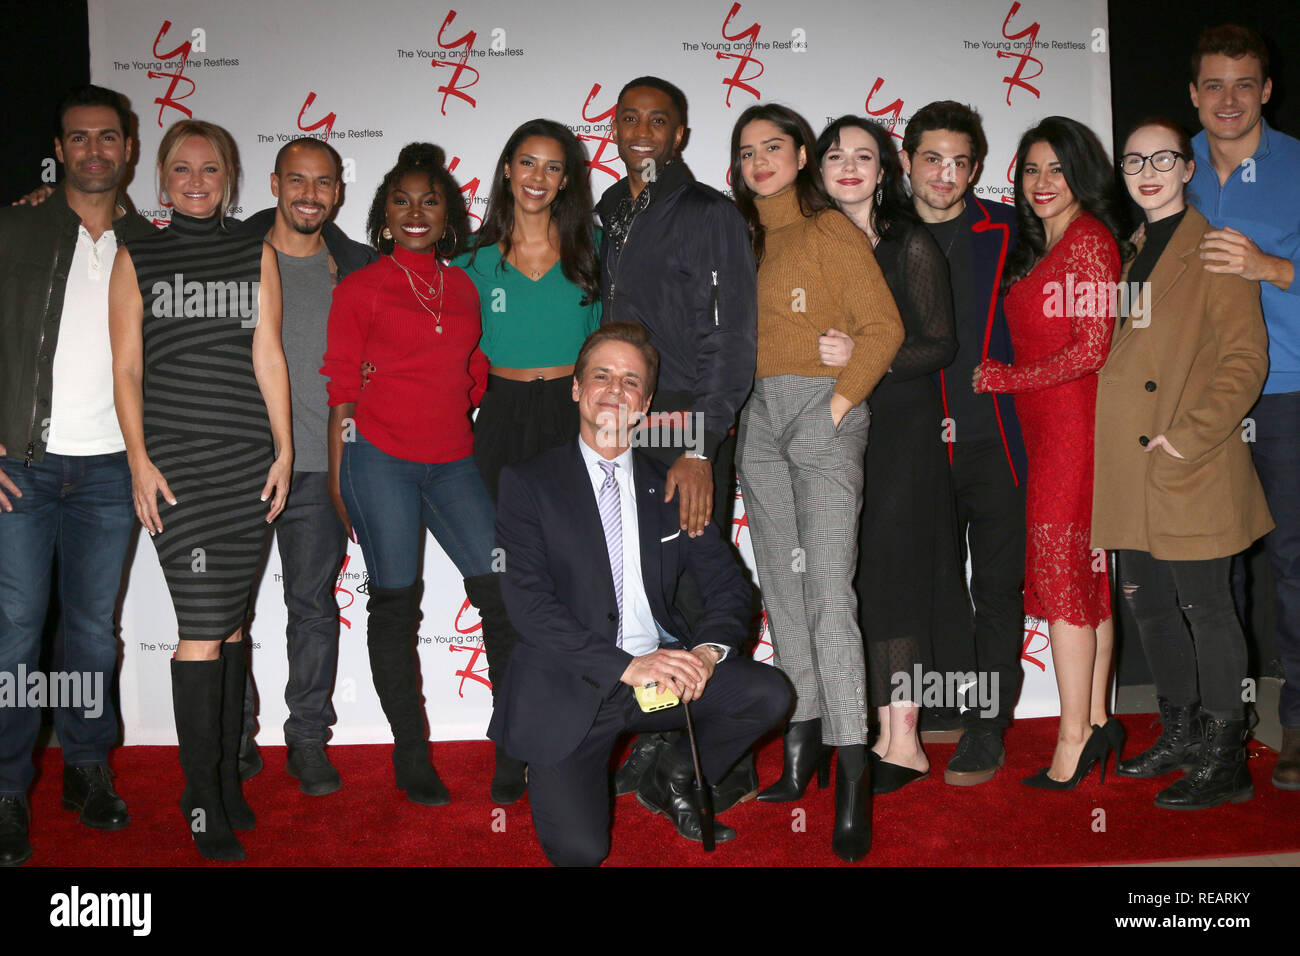 Los Angeles, CA, USA. 17th Jan, 2019. LOS ANGELES - JAN 17: Jordi Vilasuso, Sharon Case, Bryton James, Loren Lott, Alice Hunter, Christian LeBlanc, Brooks Darnell, Sasha Calle, Cait Fairbanks, Zack Tinker, Noemi? Gonzalez, Camryn Grimes, Michael Mealor at the Young and the Restless Celebrates 30 Years at #1 at the CBS Television CIty on January 17, 2019 in Los Angeles, CA Credit: Kay Blake/ZUMA Wire/Alamy Live News Stock Photo